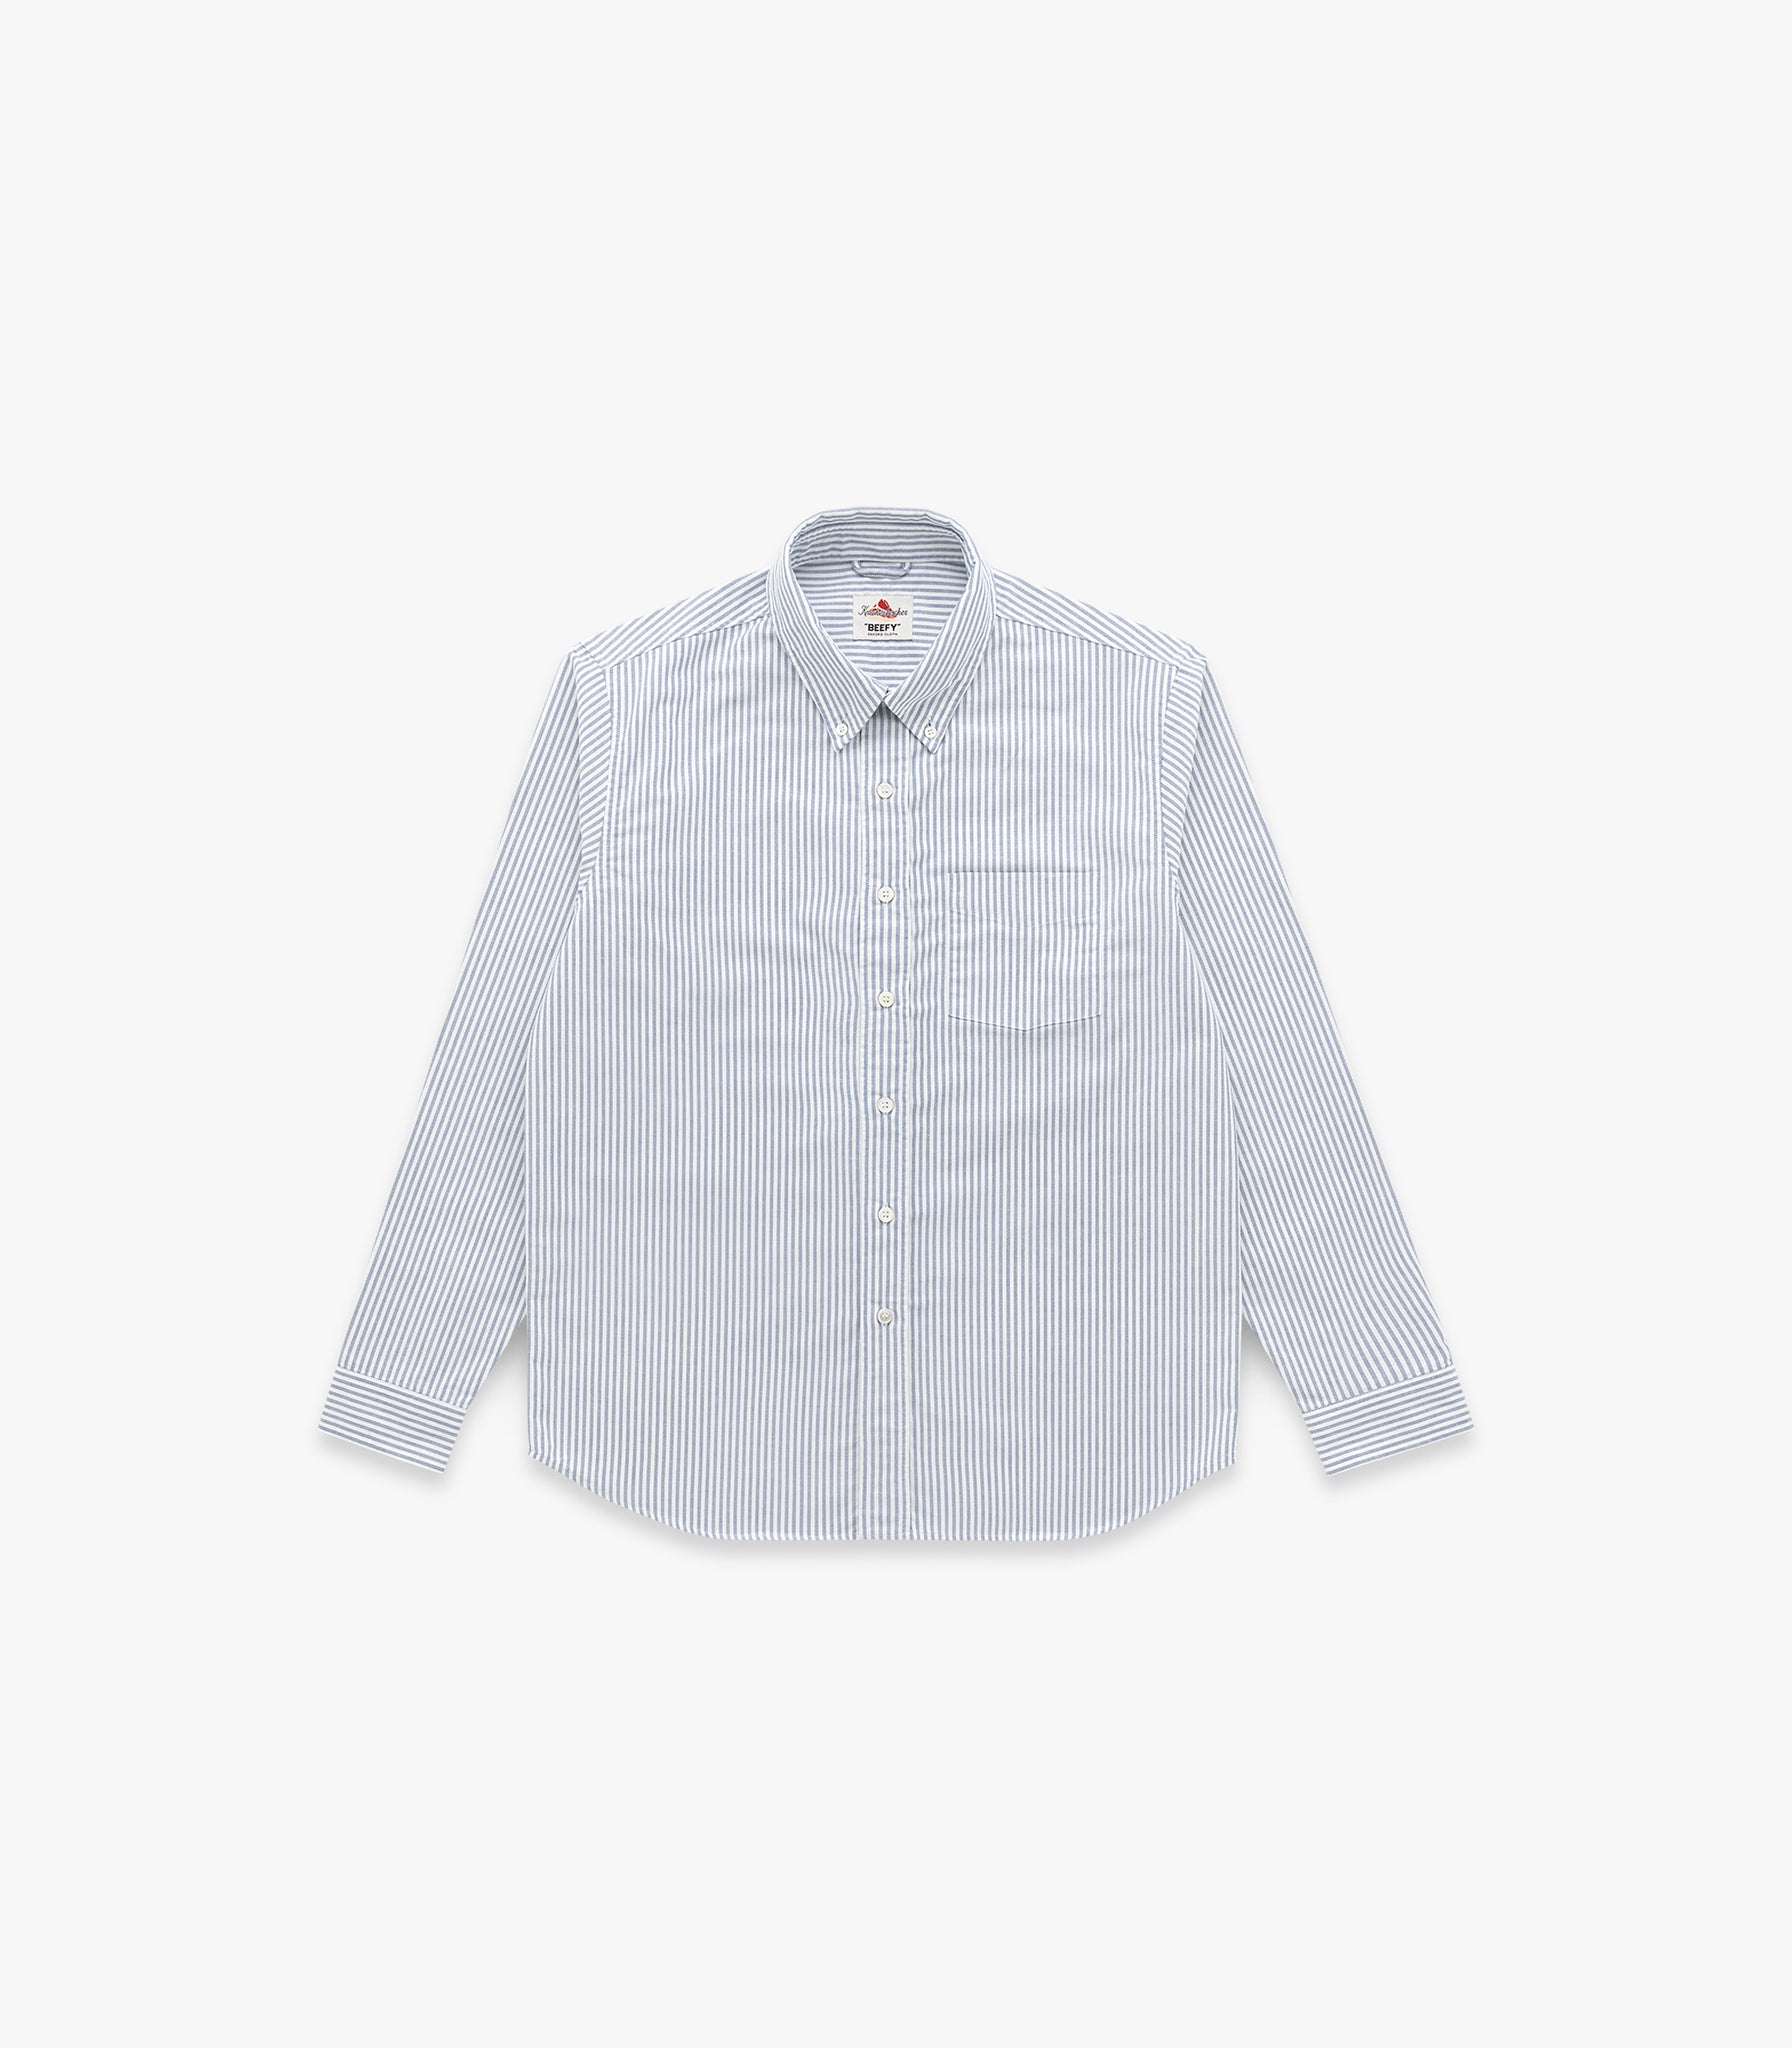 "Beefy" Cotton Oxford